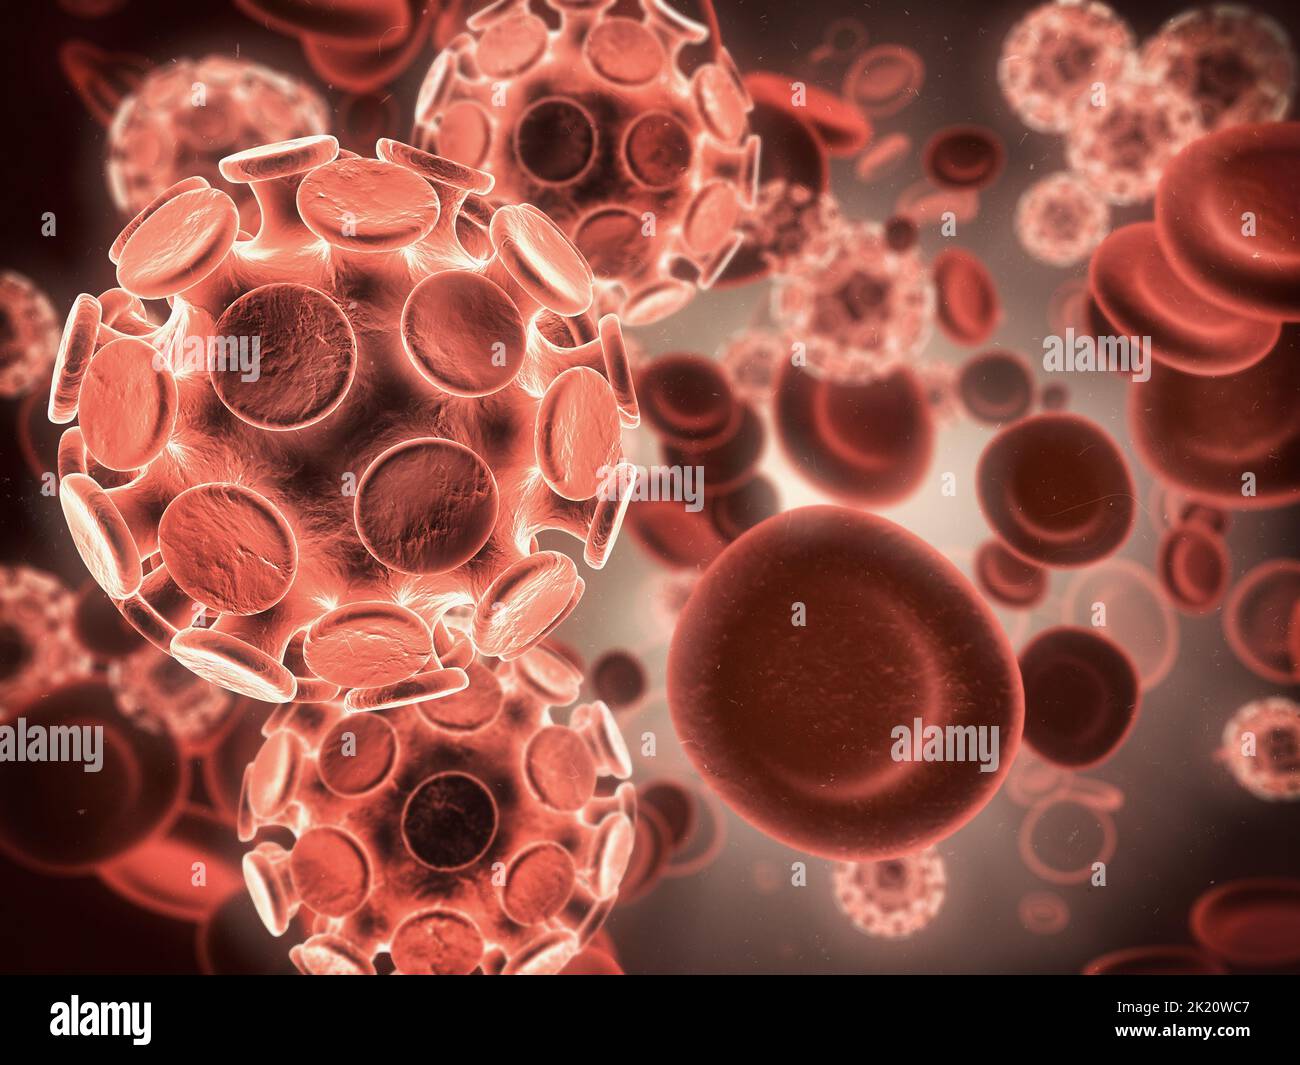 The danger lies in what we can not see. Microscopic view of a virus attacking healthy cells in the human body. Stock Photo